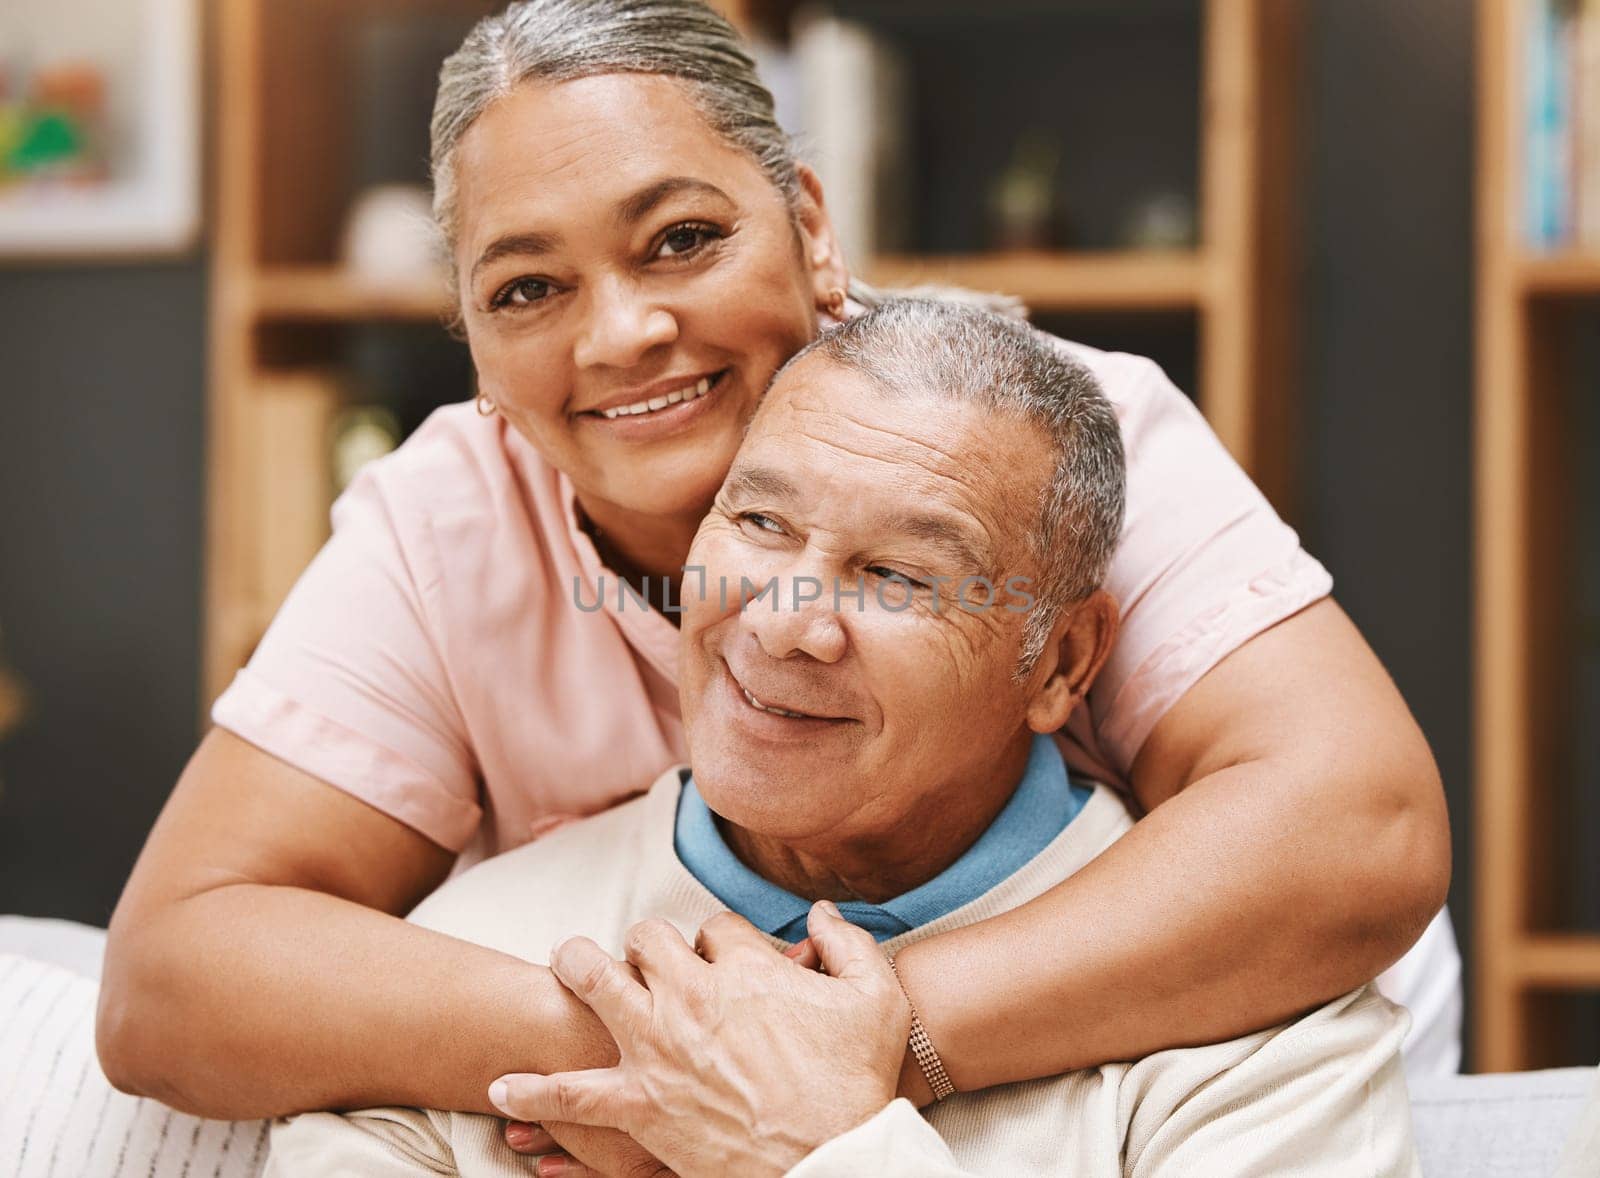 Love, senior couple and hug in living room home, bonding caring and smiling. Valentines day, romance and portrait of man and woman hugging, embrace and cuddle for support while enjoying time together.